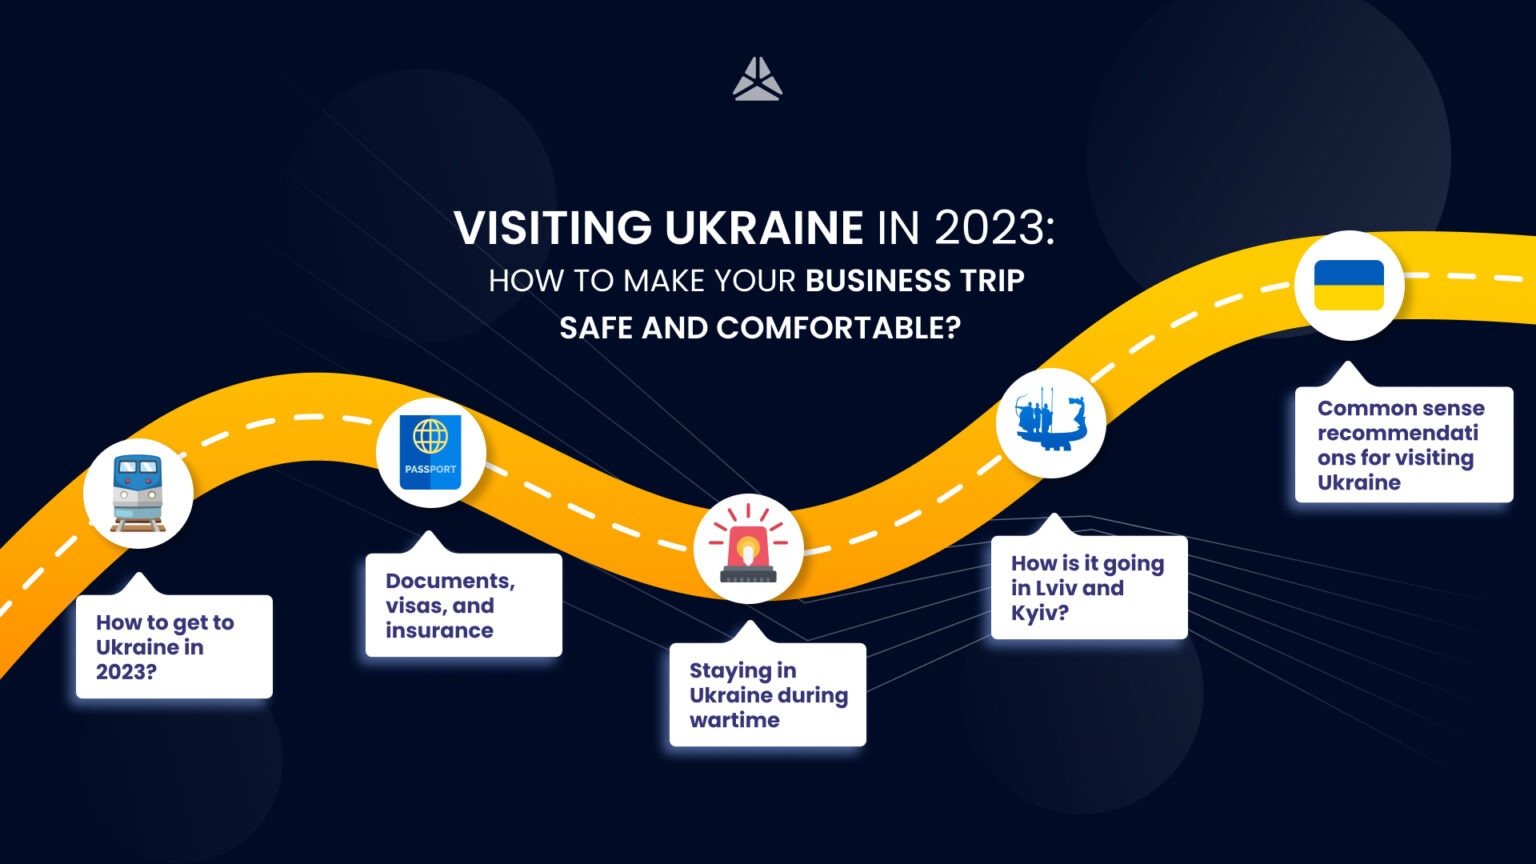 Visiting Ukraine in 2023 How to make your business trip safe and